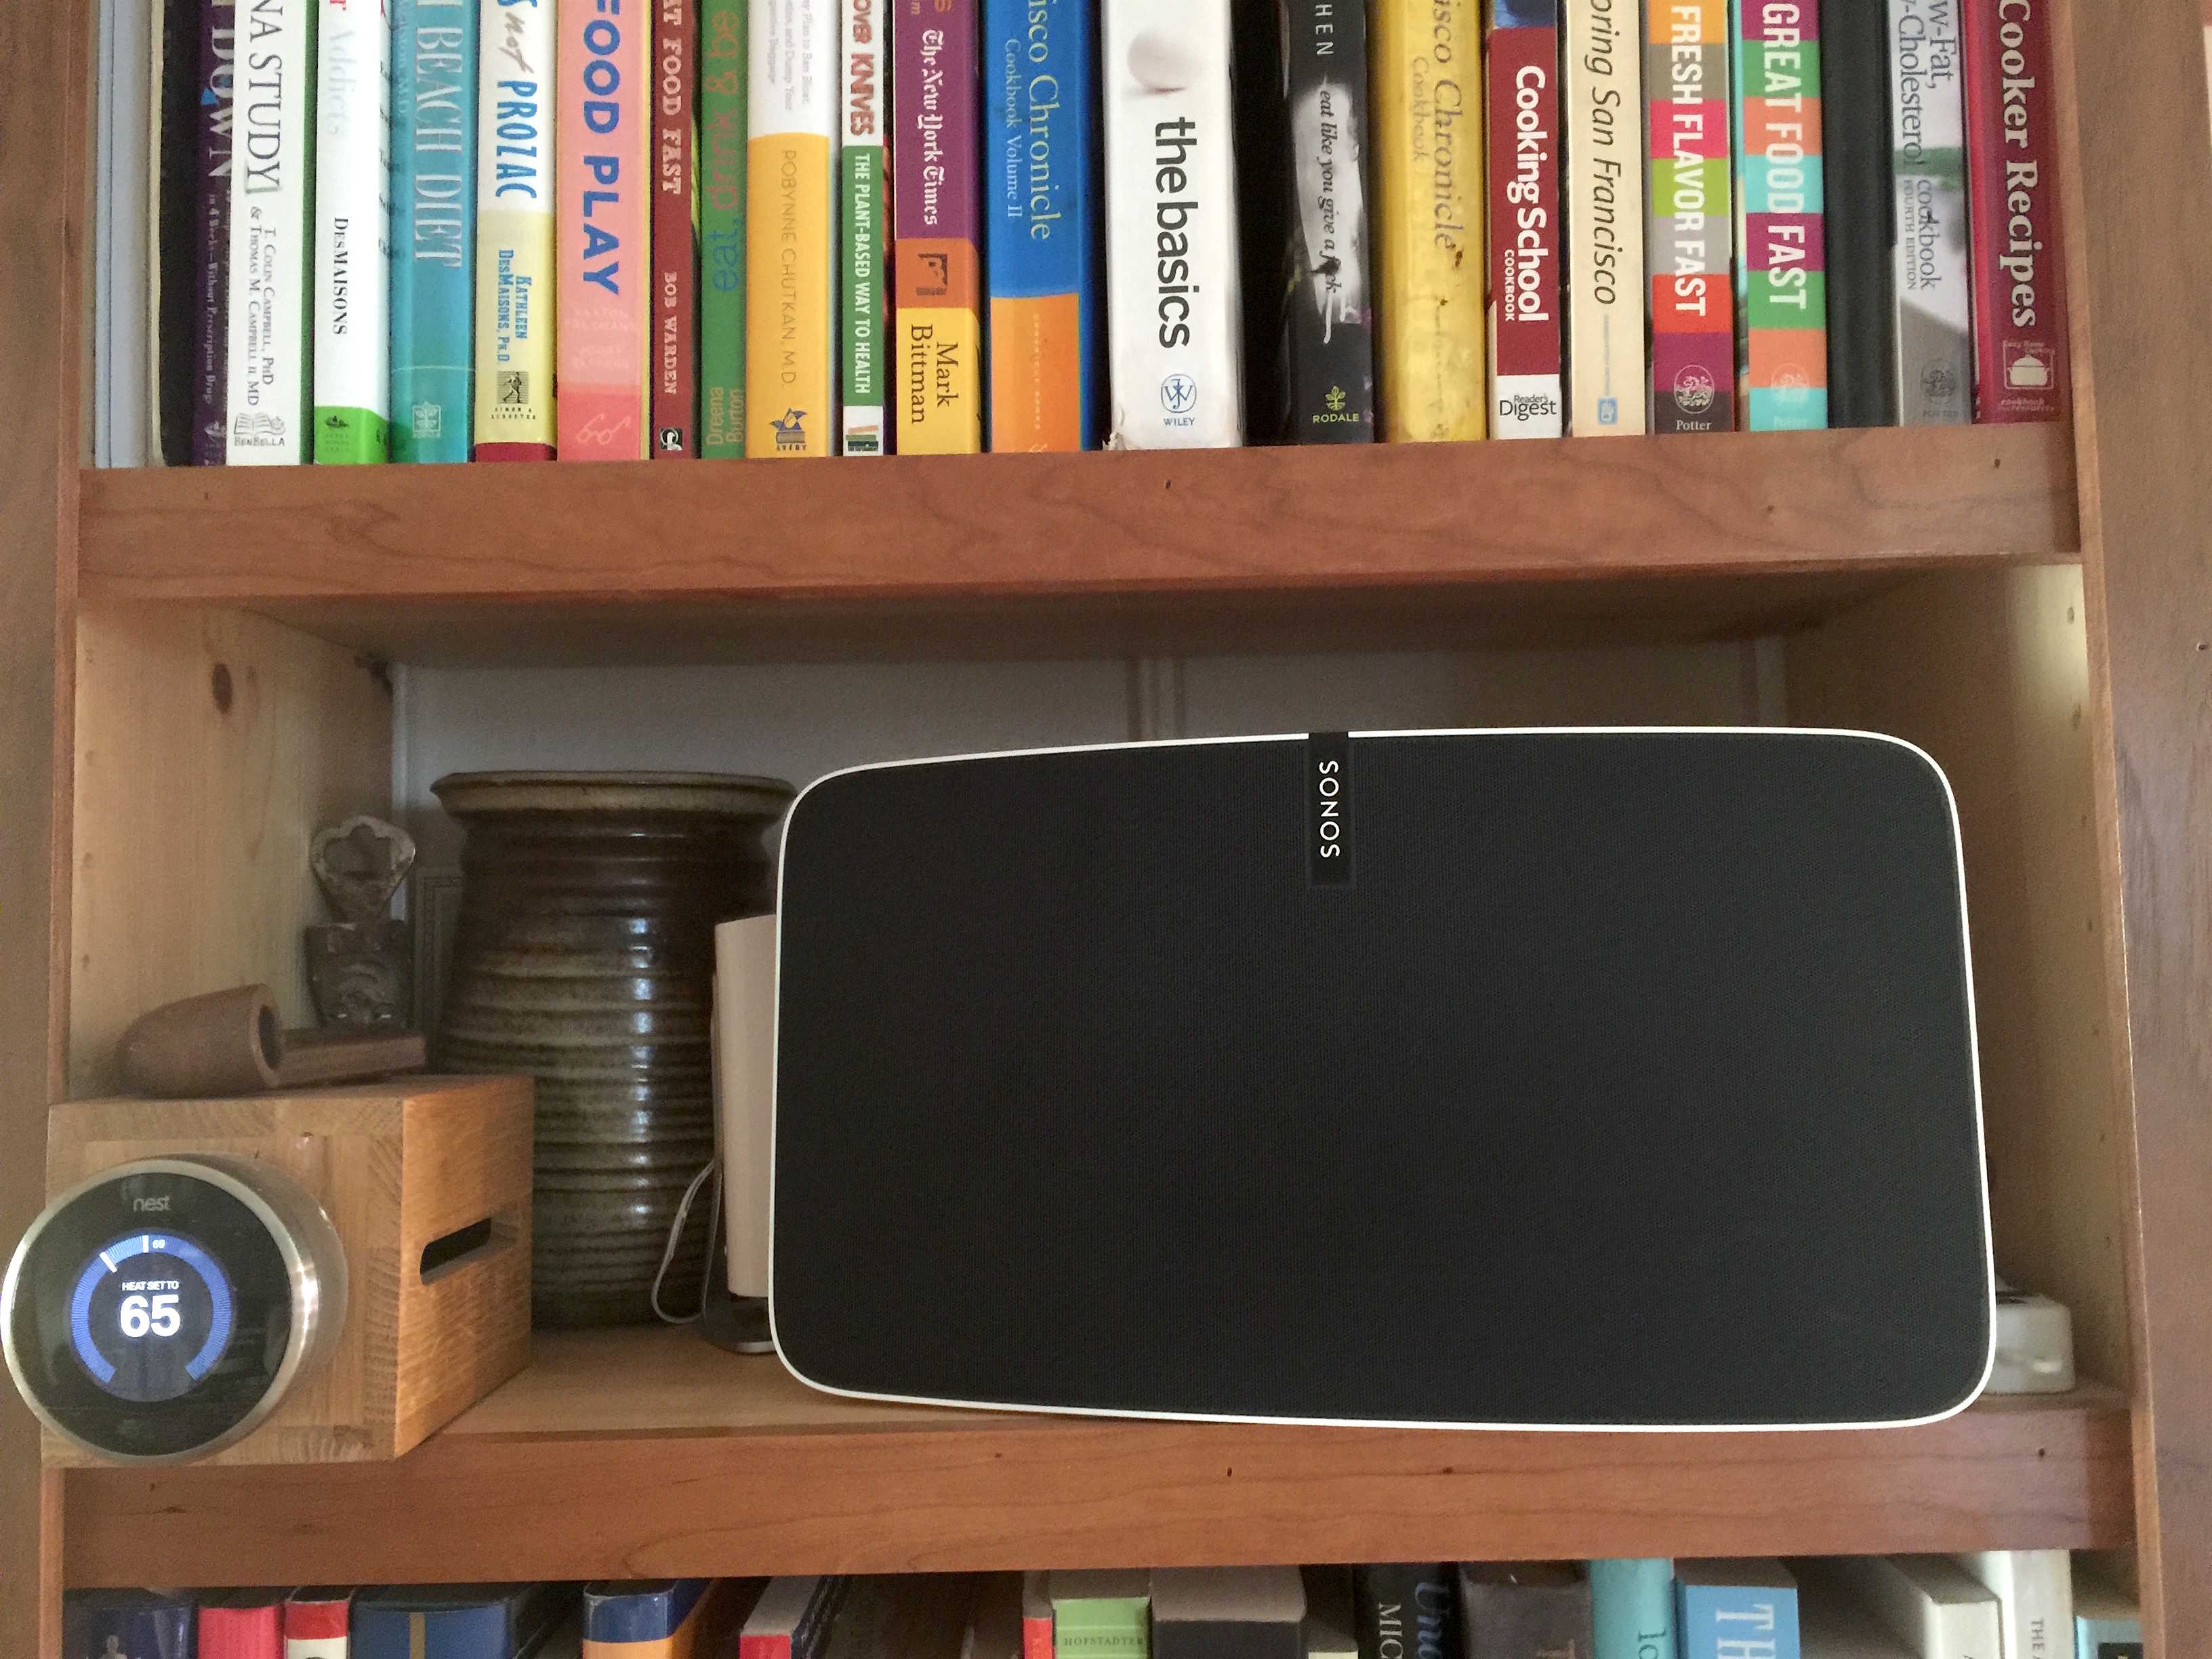 Autonom Smitsom sygdom Picket Review: Sonos Play:5 speaker is a room shaking rabble-rouser